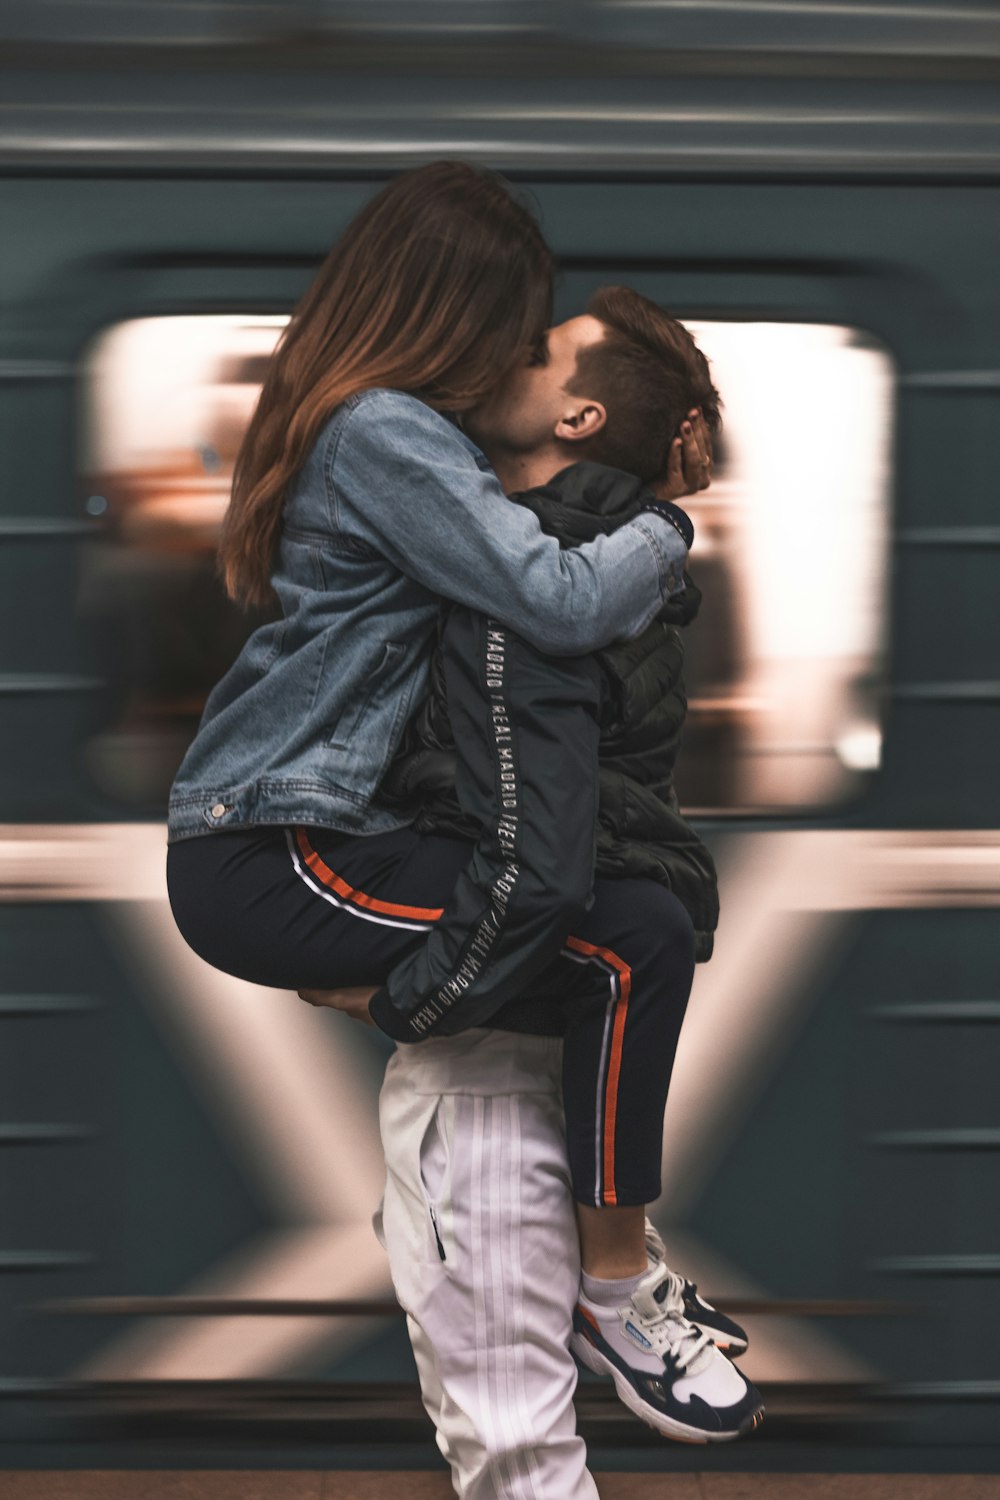 30,000+ Tight Hug Pictures | Download Free Images on Unsplash